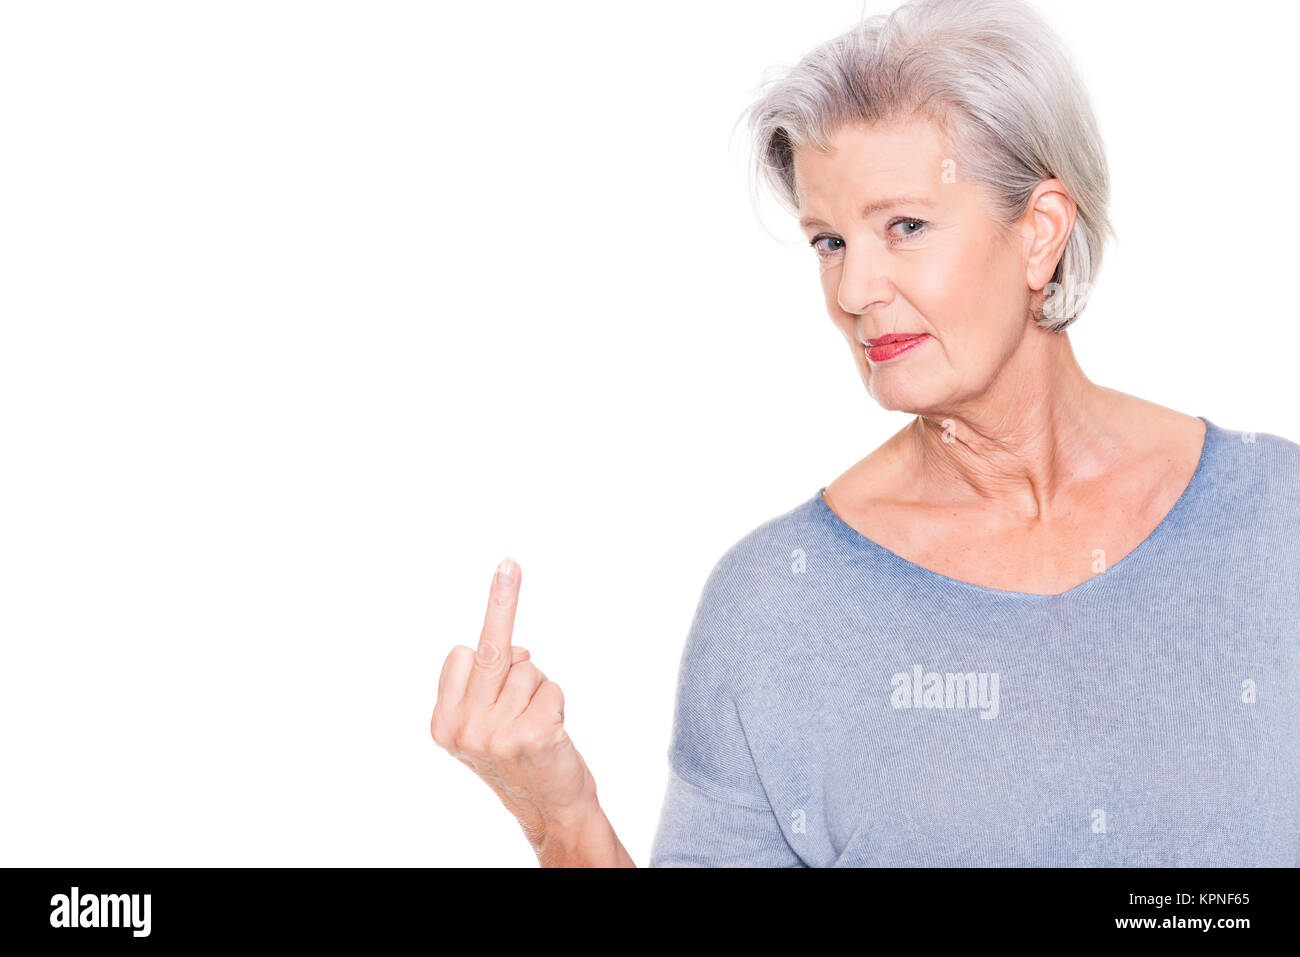 woman showing middle finger Stock Photo